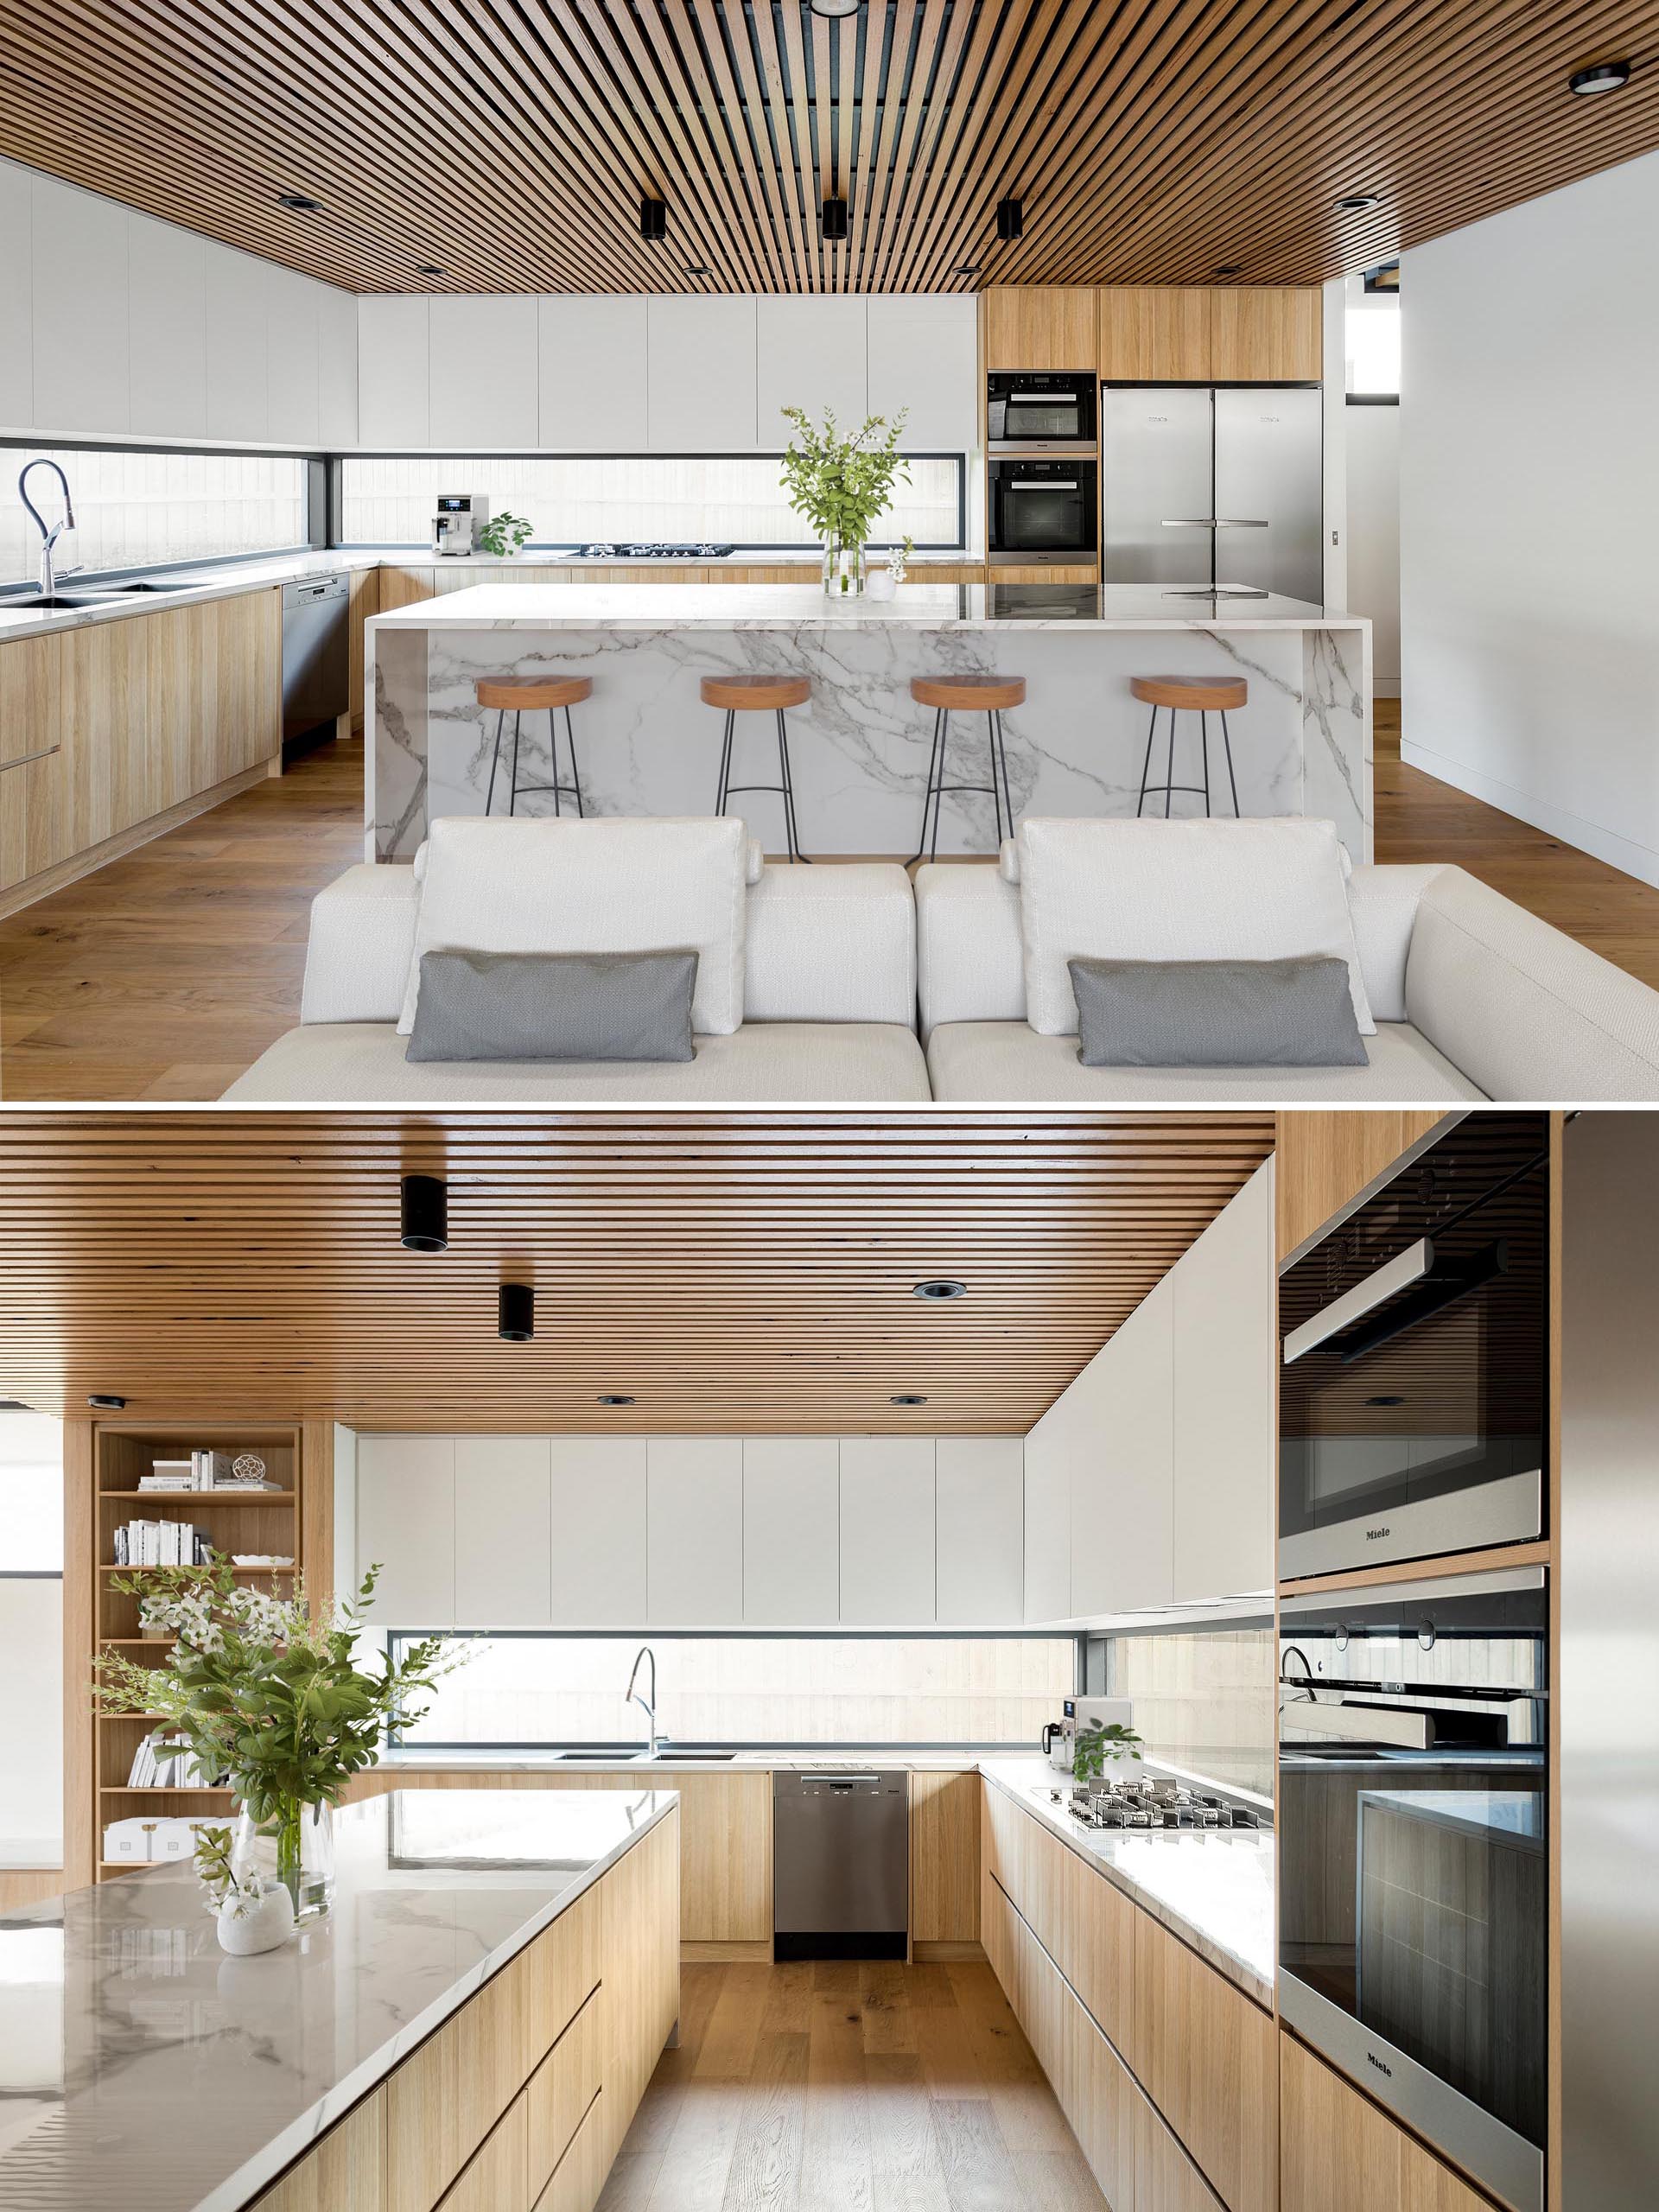 A modern kitchen with a wood ceiling, minimalist cabinets, and a marble island.